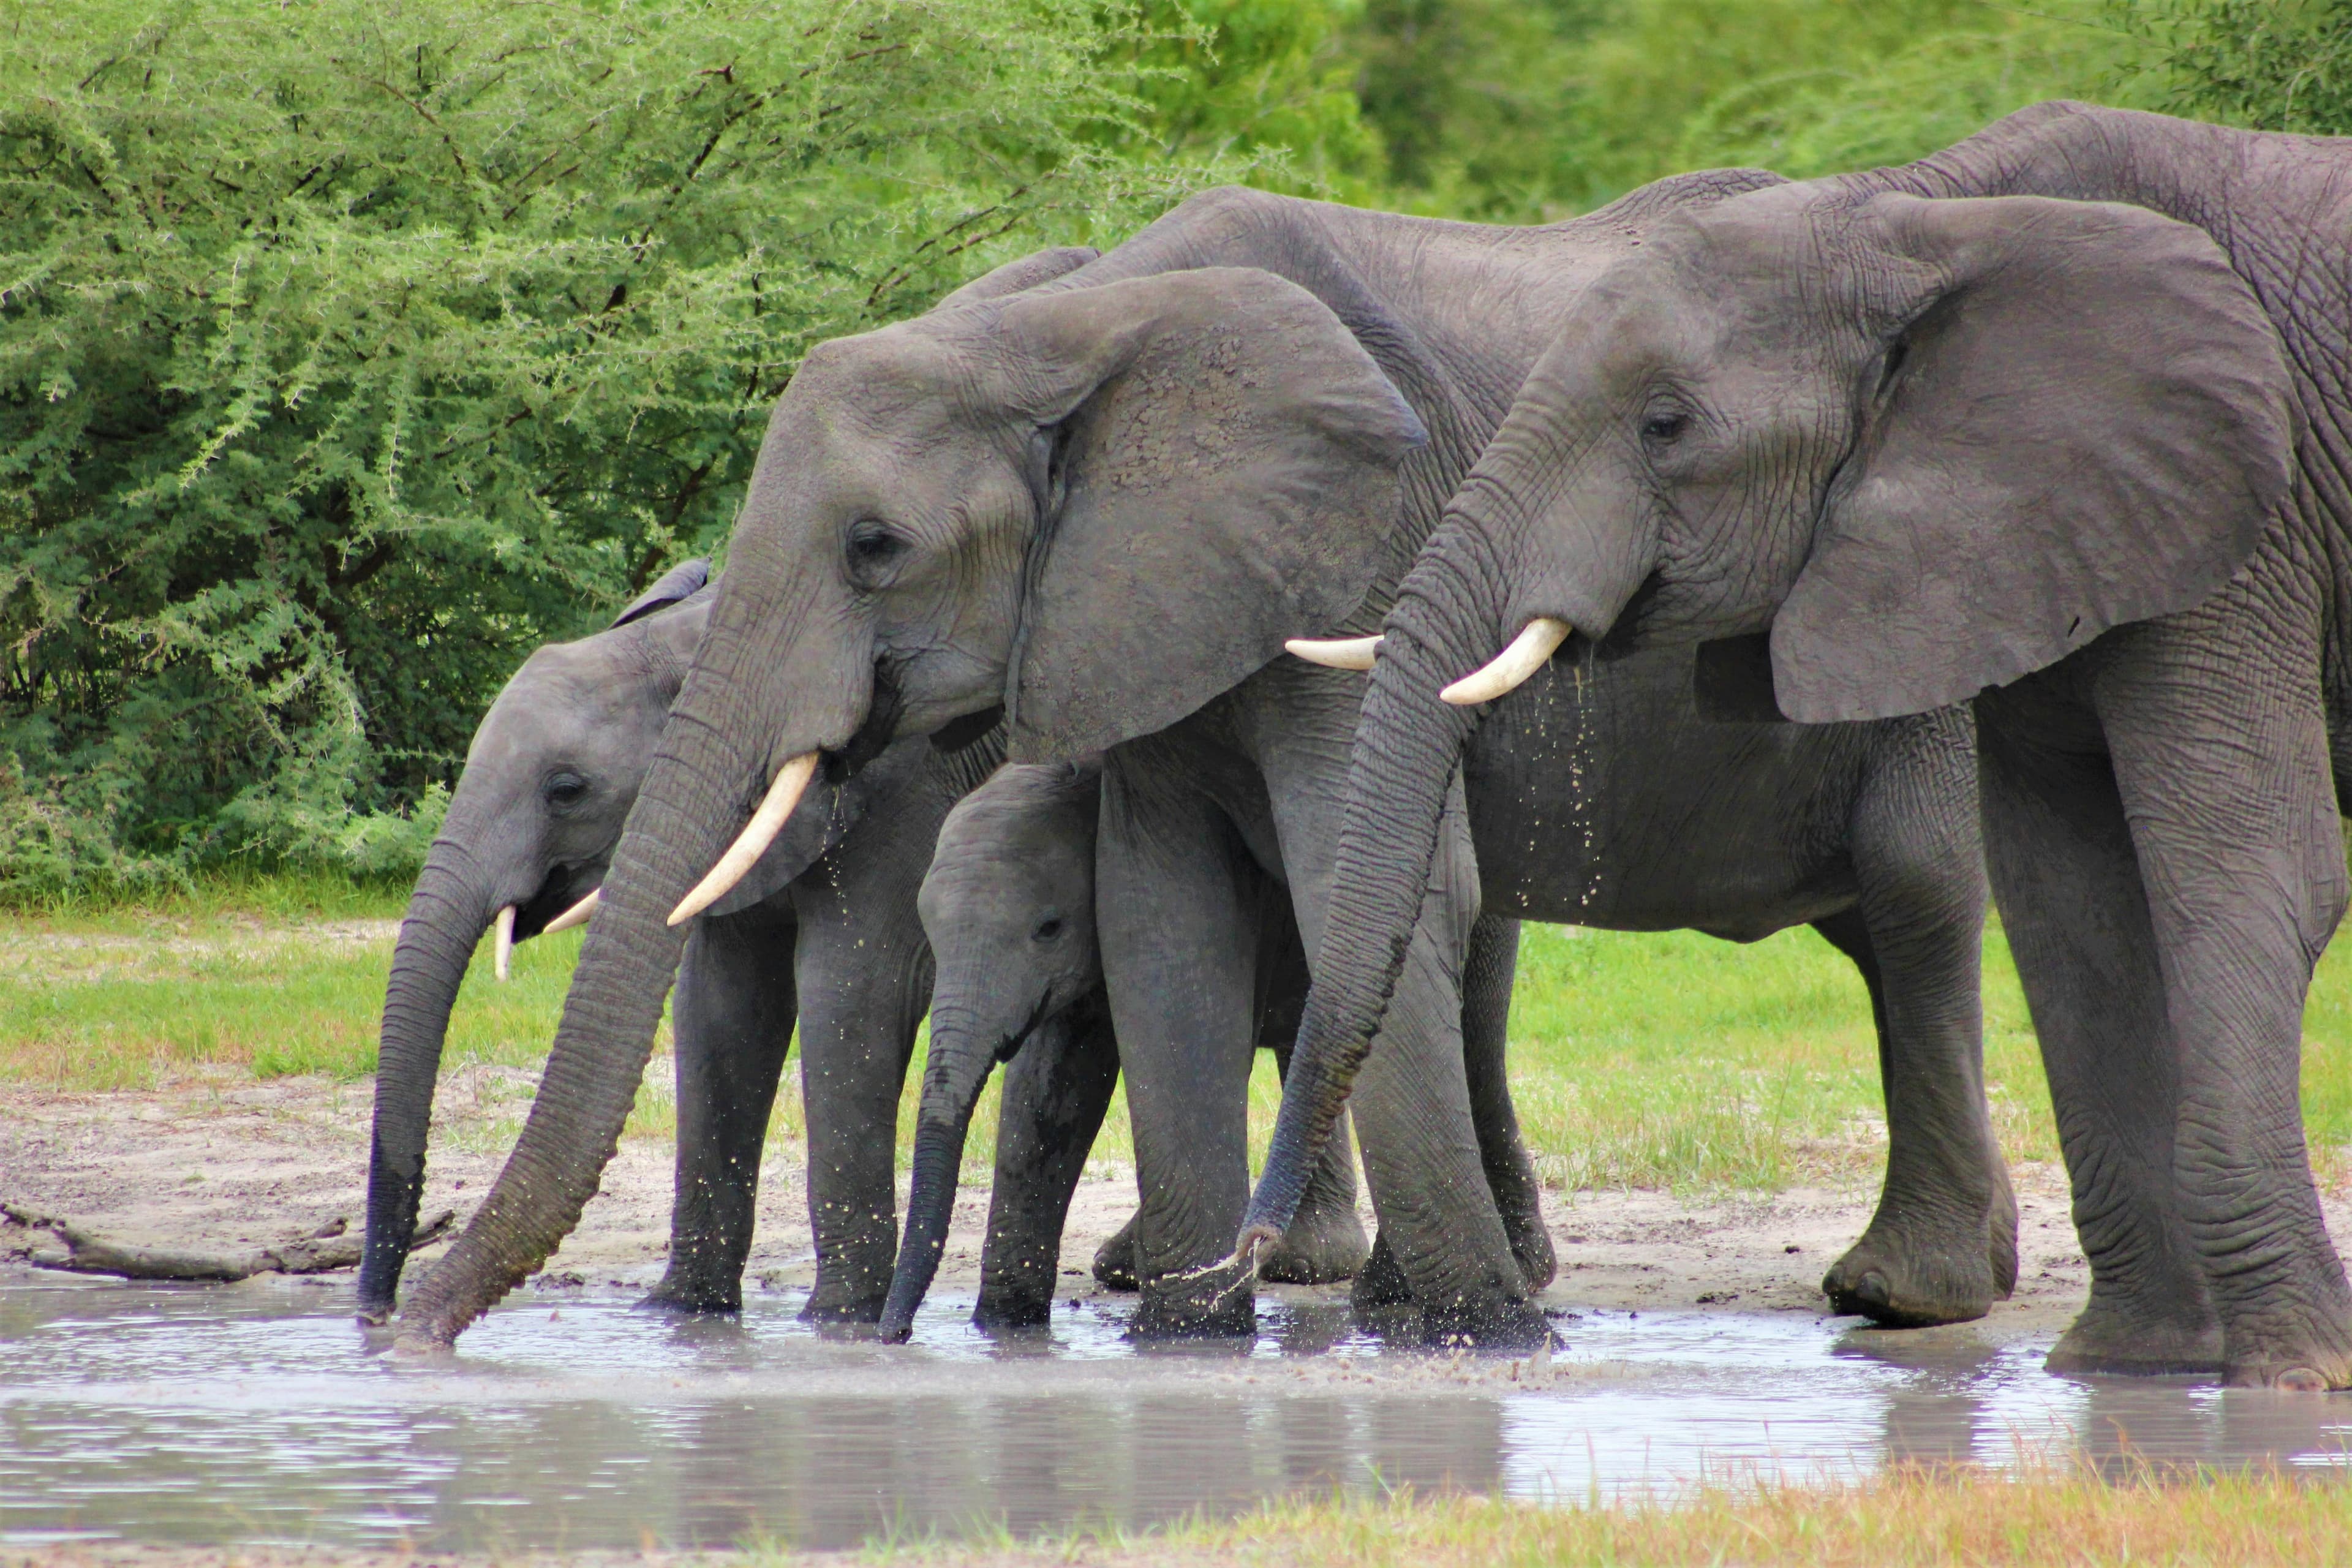 A herd of elephants wades through a waterhole surrounded by green vegetation.